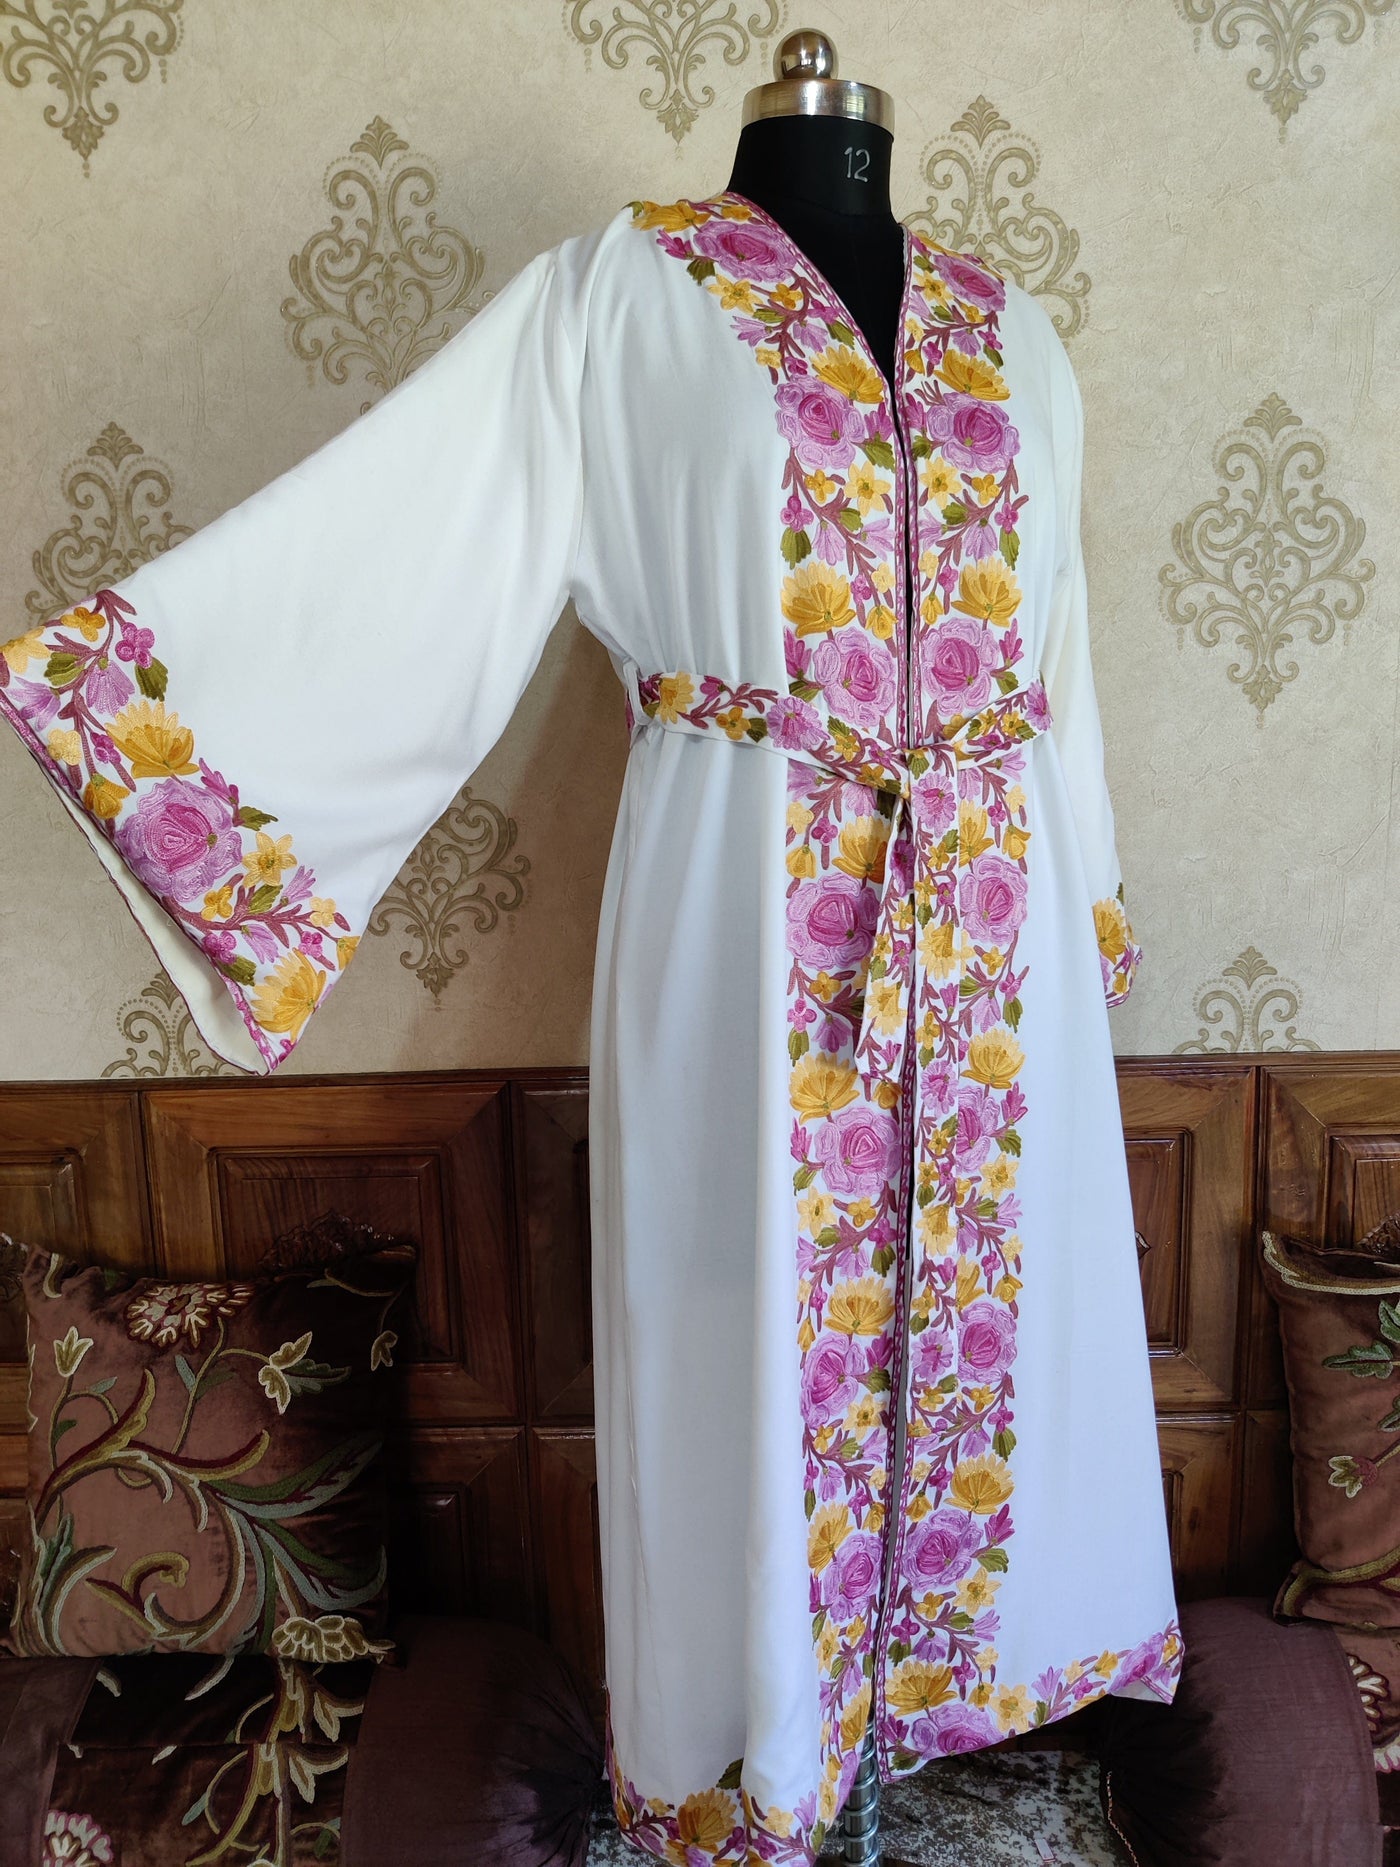 White Long Kashmiri Embroidery Robe with Floral Embroidery Belt | Kashmiri Kimono Robe KashmKari